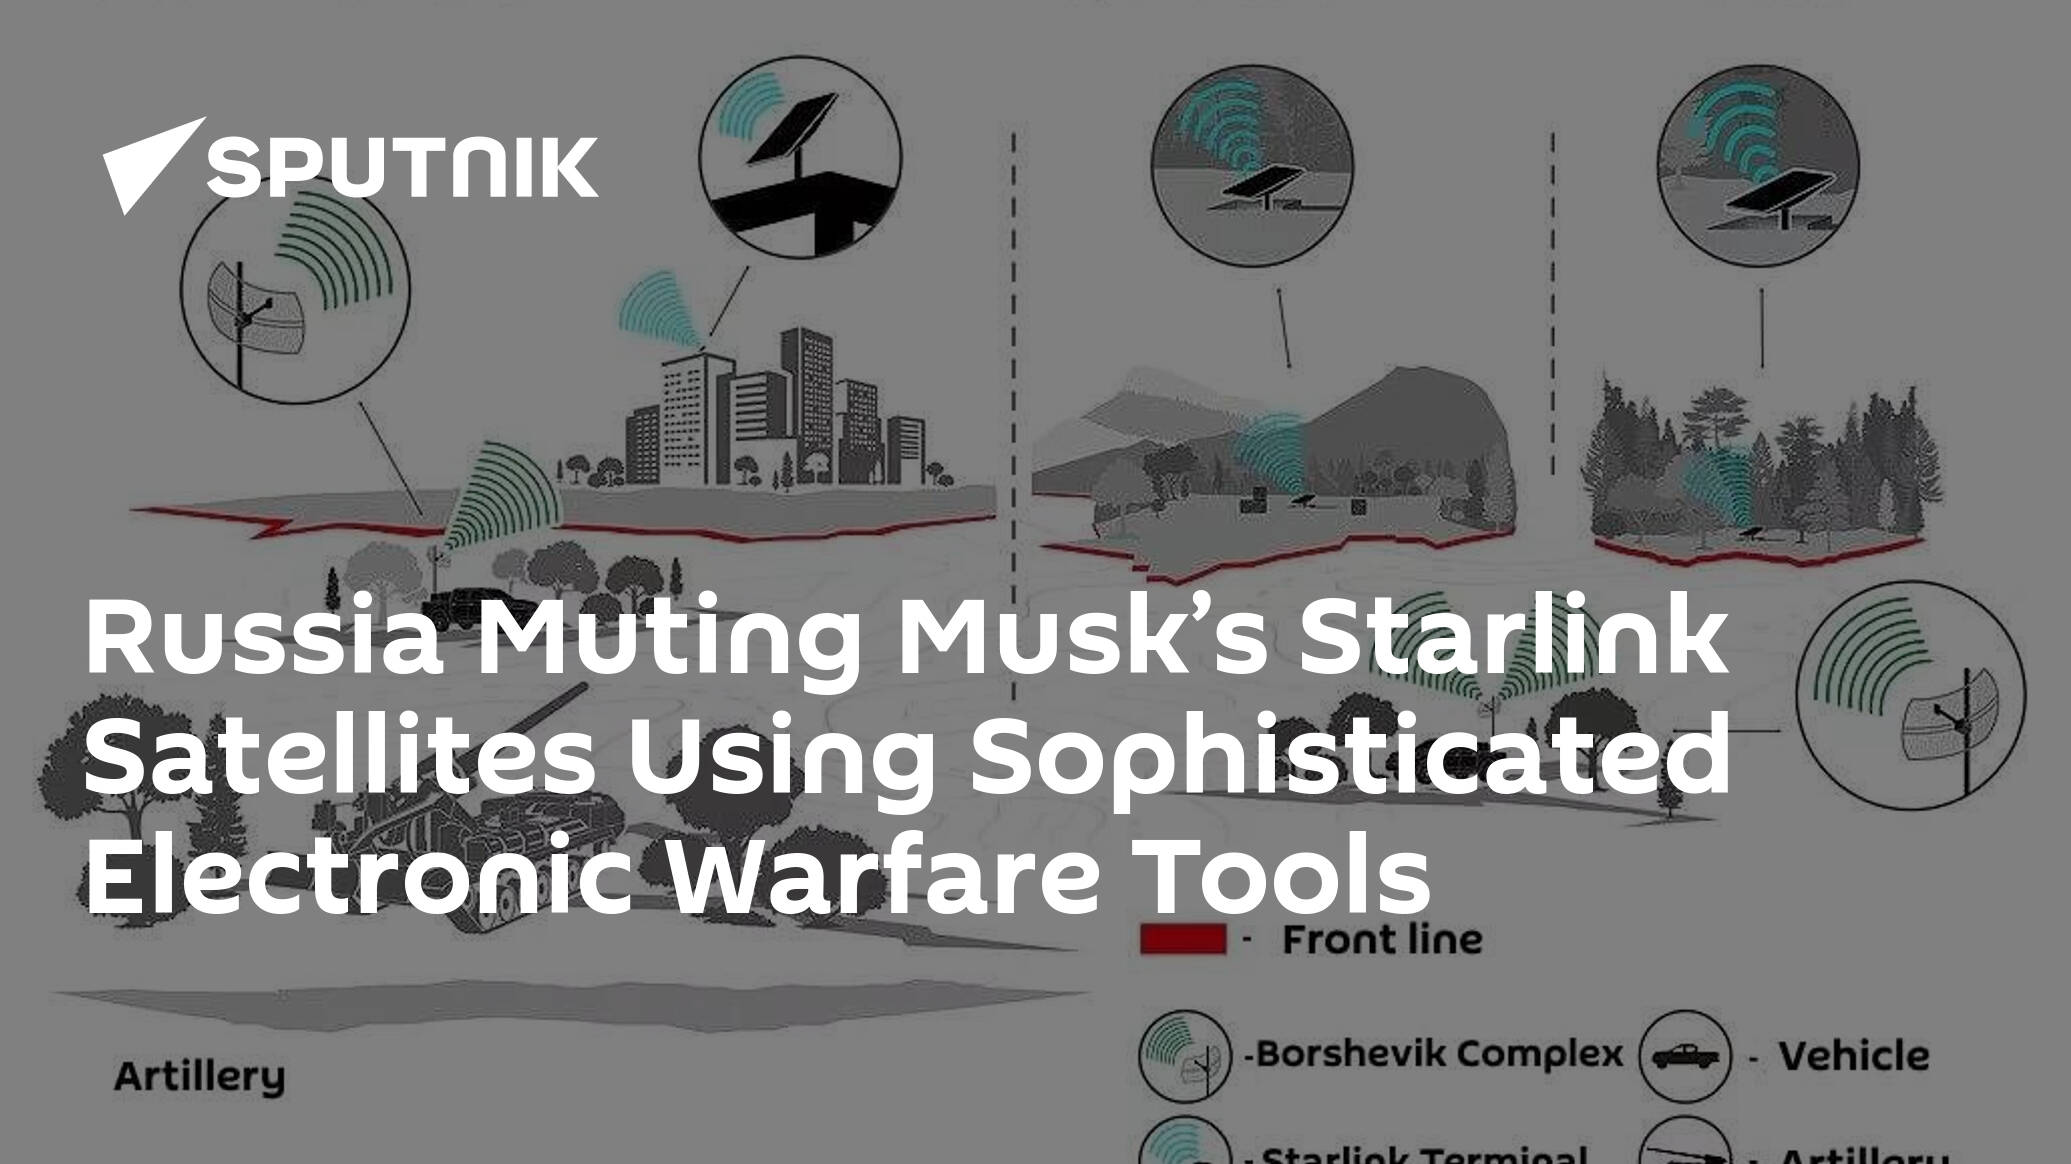 Russia Muting Musk s Starlink Satellites Using Sophisticated Electronic Warfare